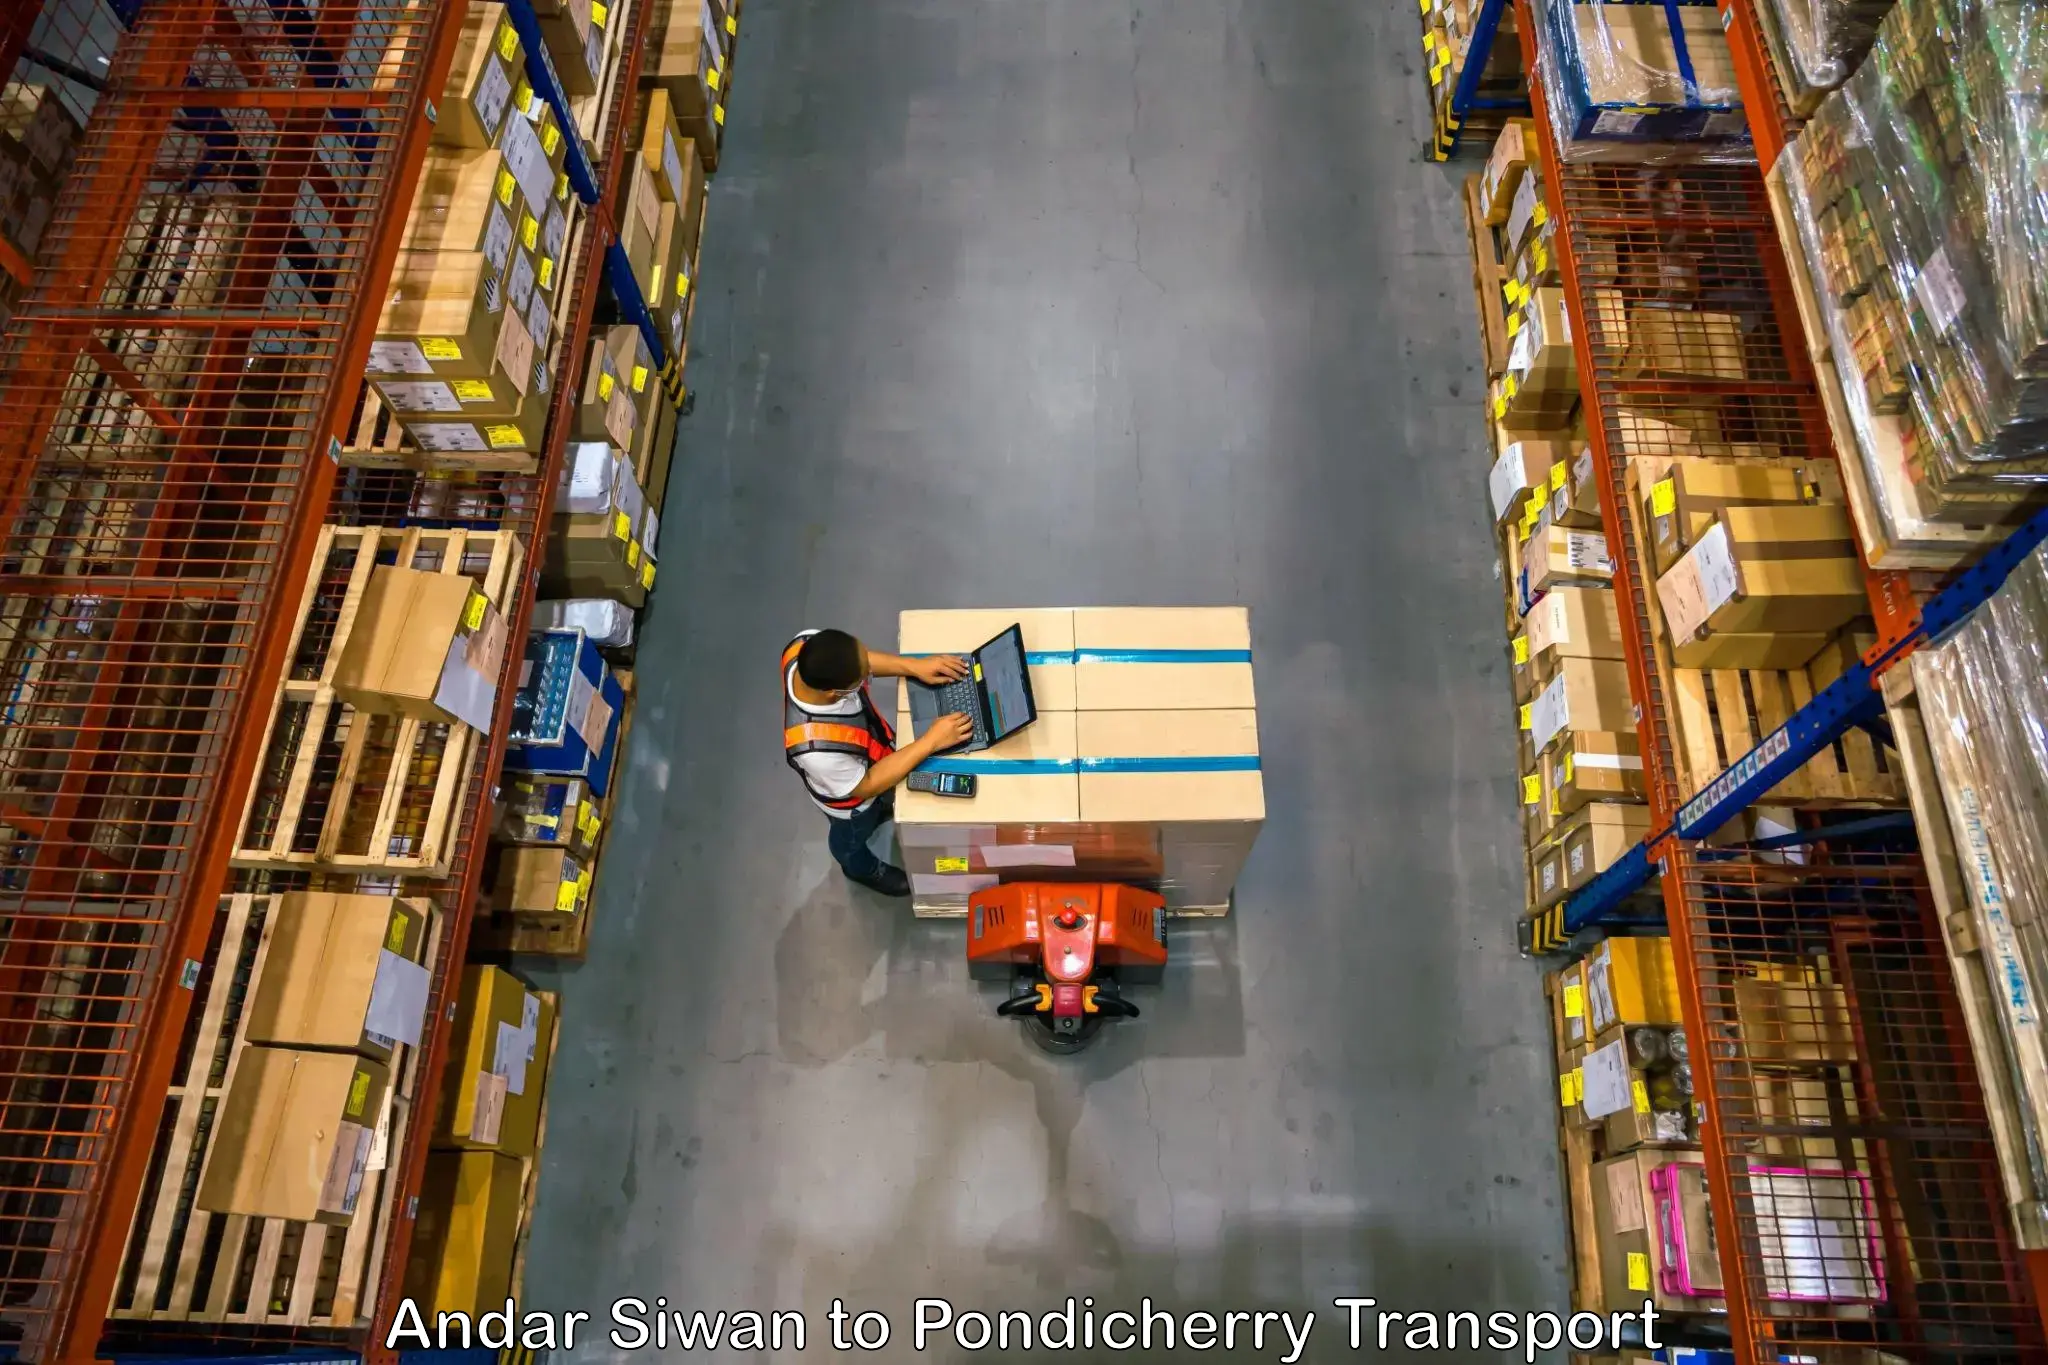 Furniture transport service in Andar Siwan to Pondicherry